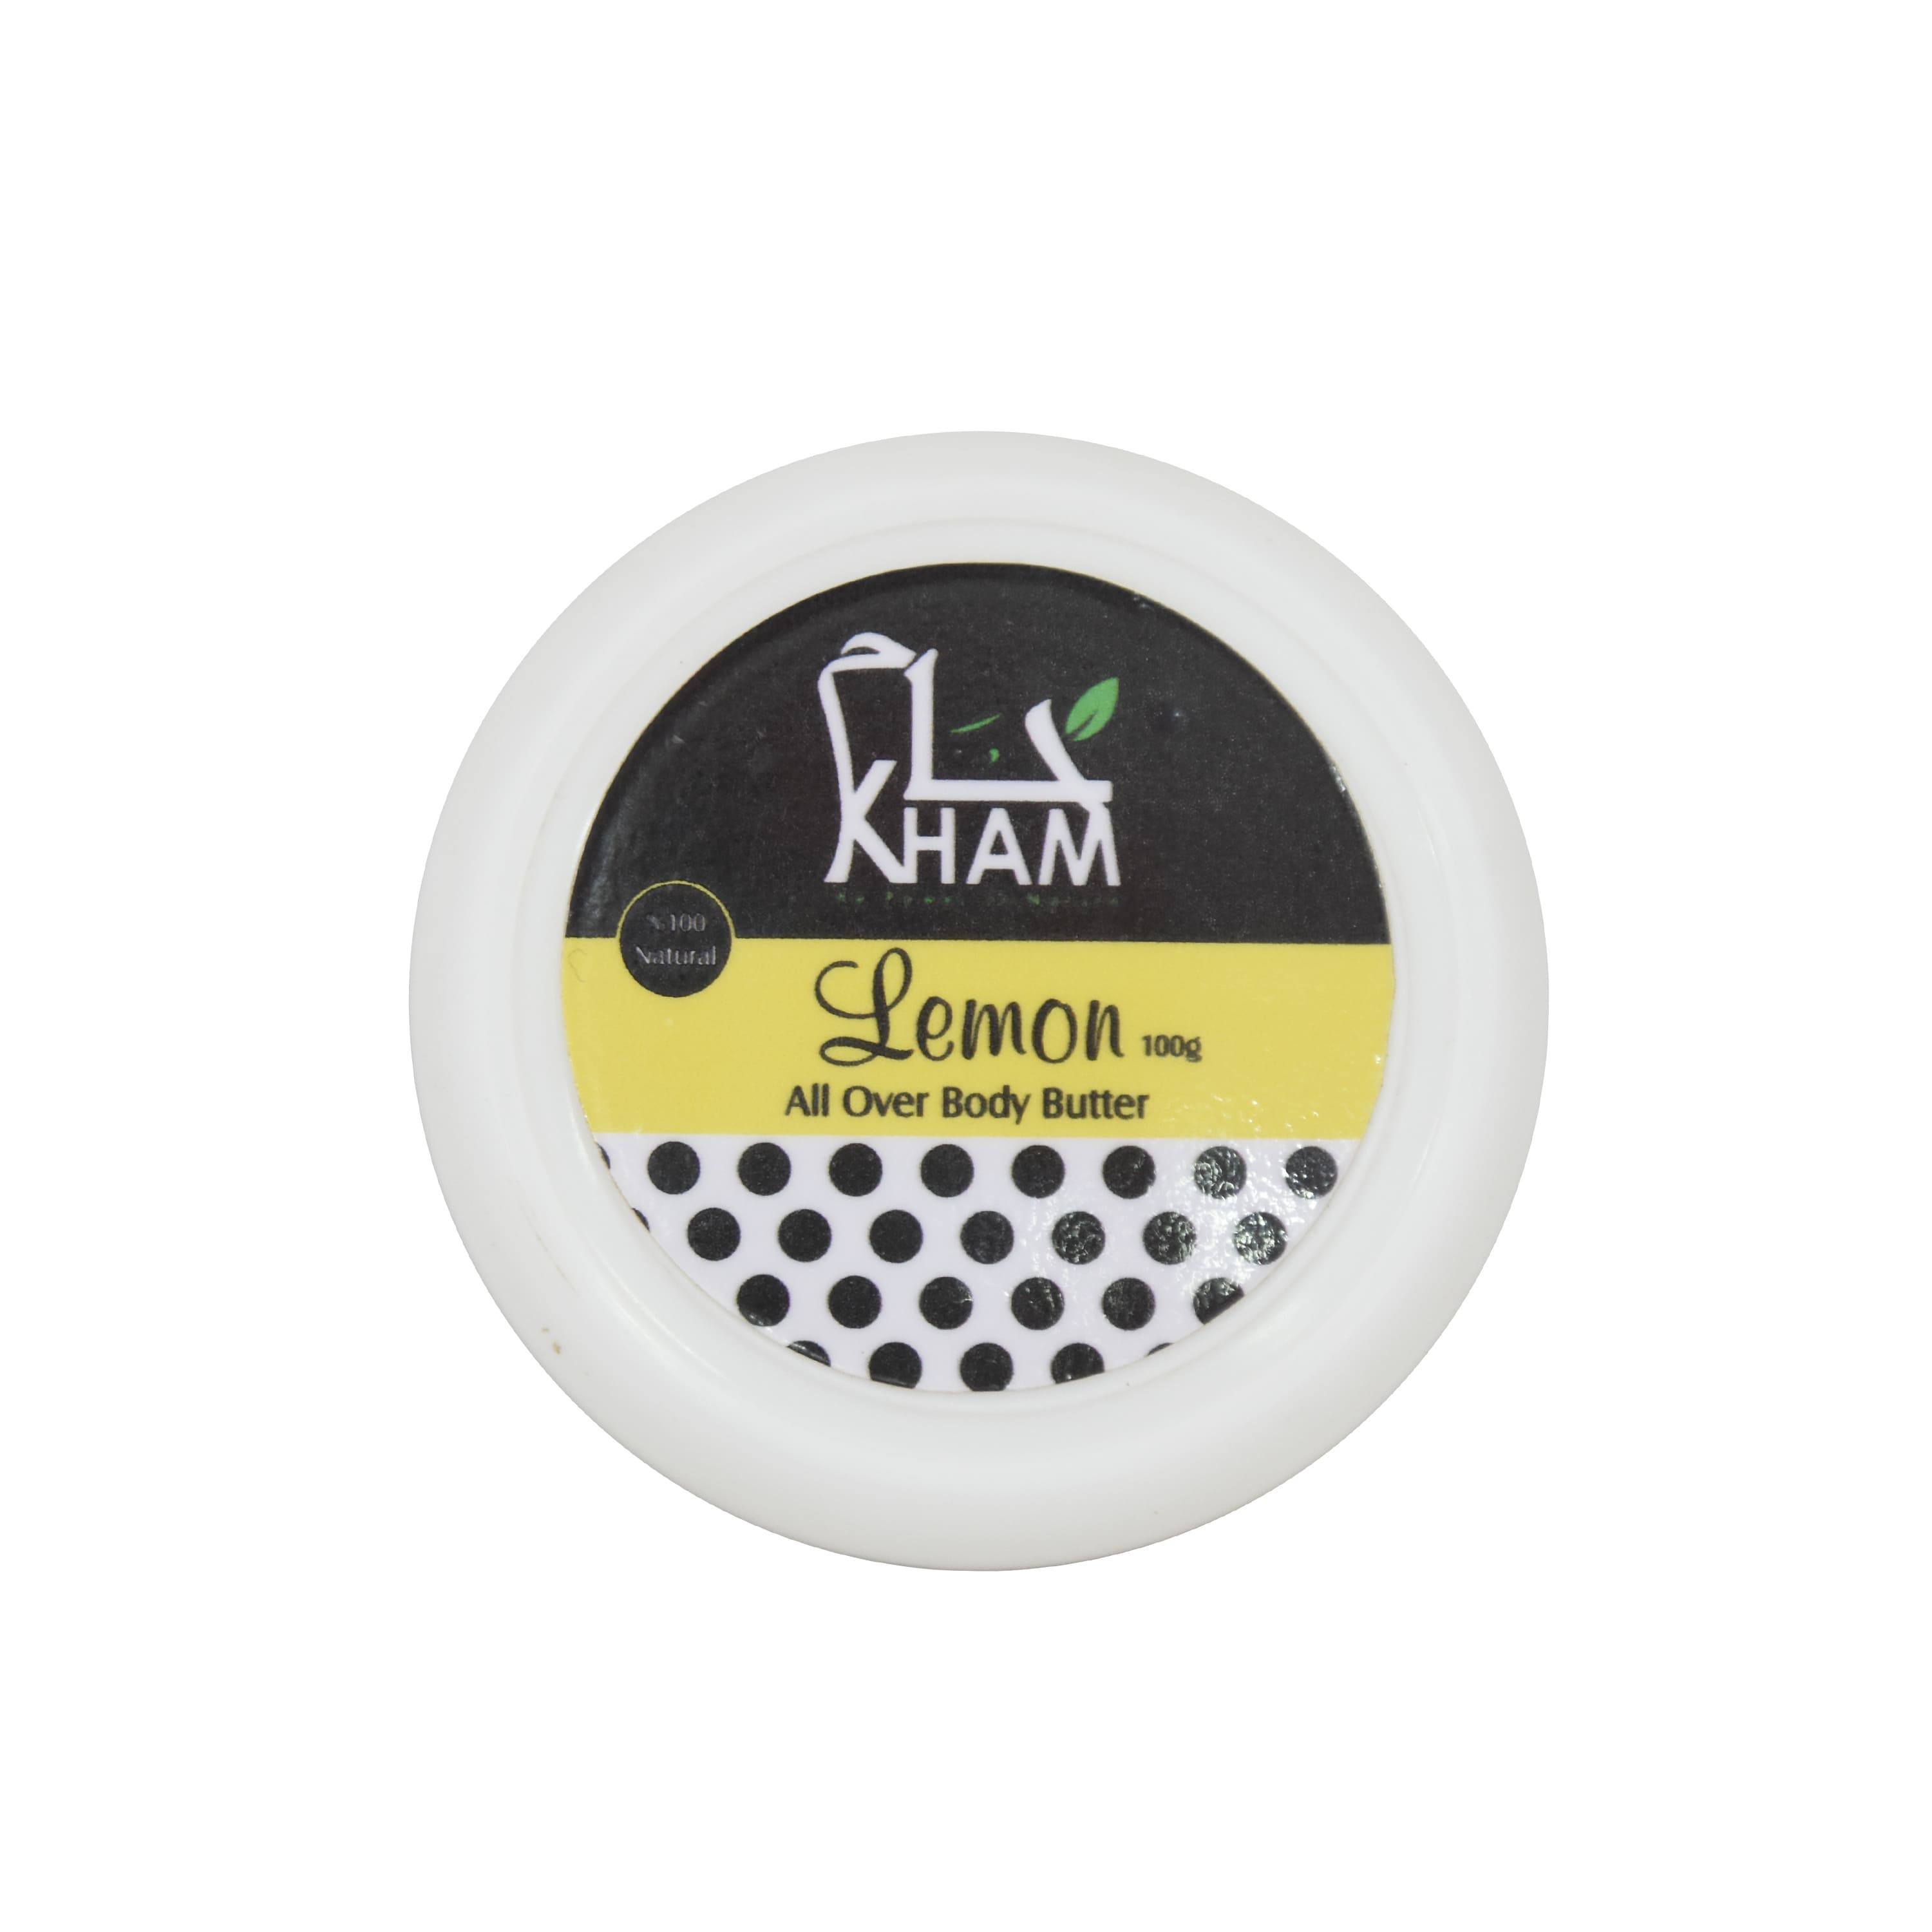 Kham Lemon Body Butter (100 gm) to moisturize and soften the body a strong characteristic odor